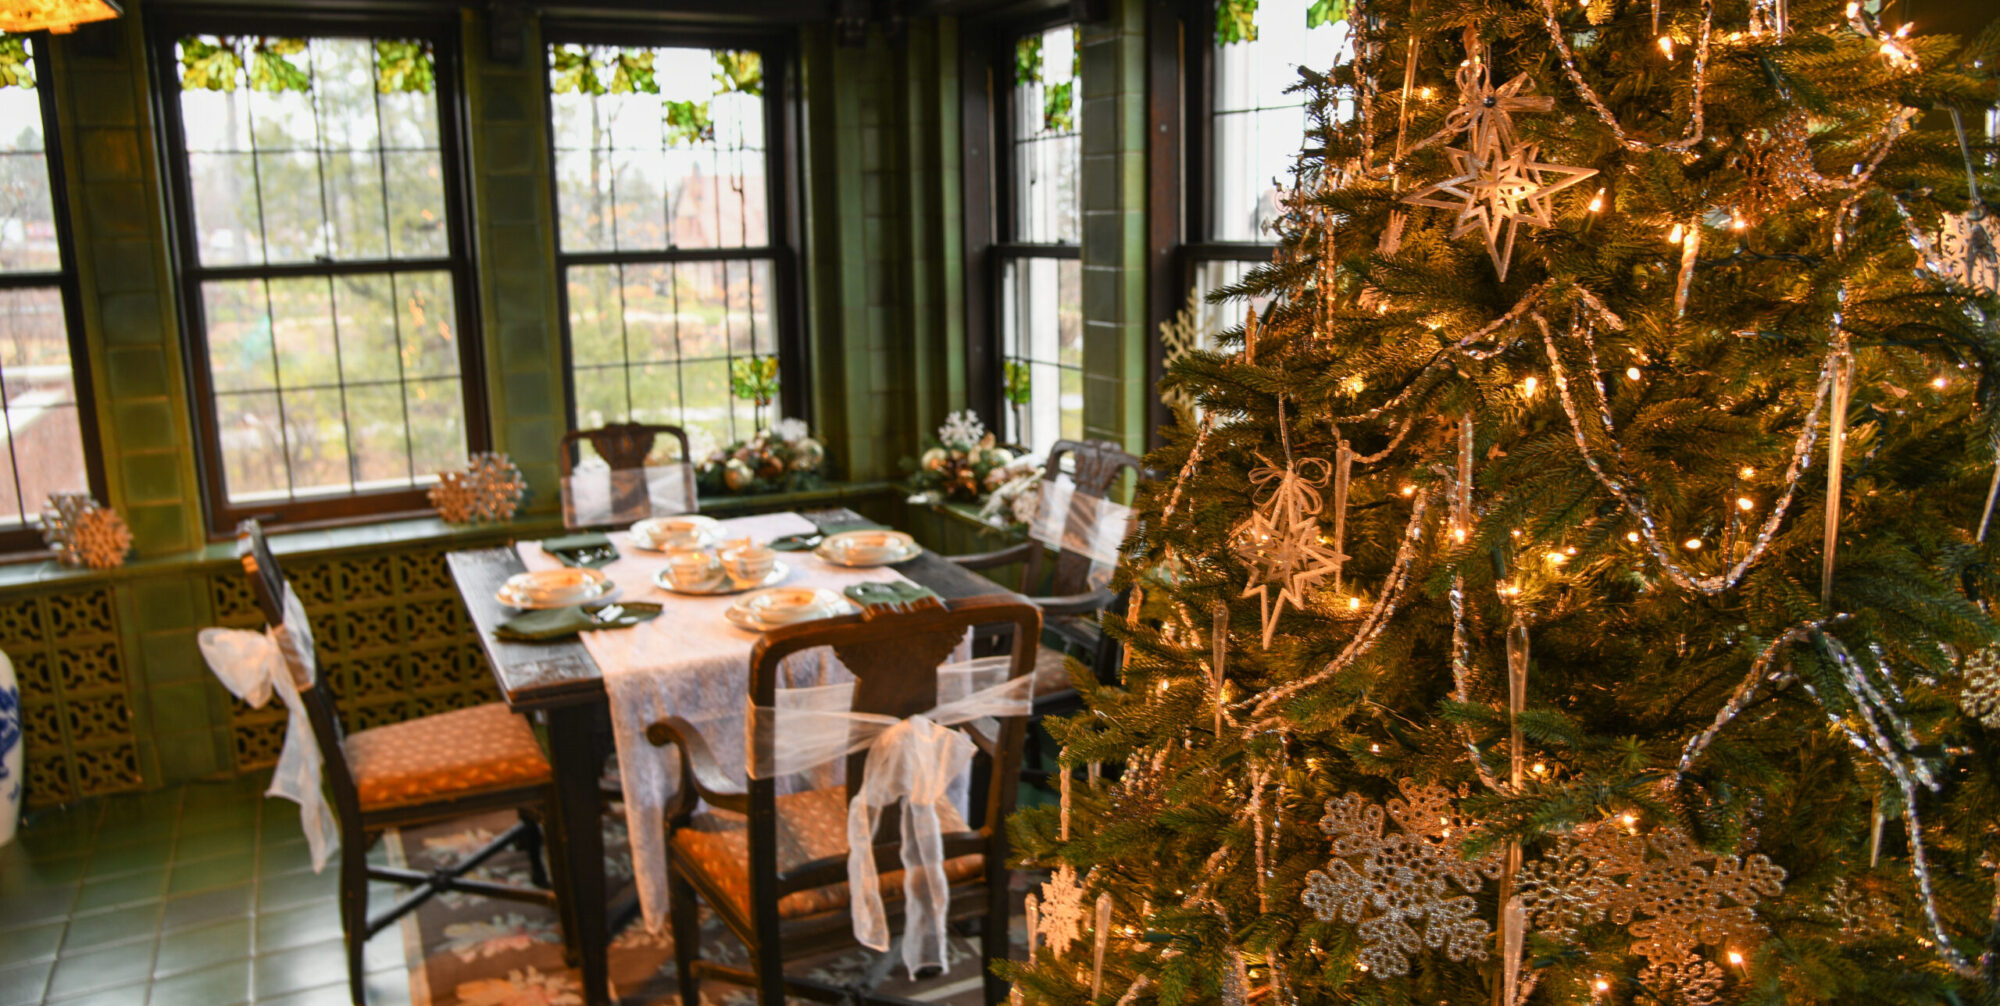 A Christmas tree decroated with lights, ornaments, and white snowflakes stands in front of a plated breakfast table and glass windows.